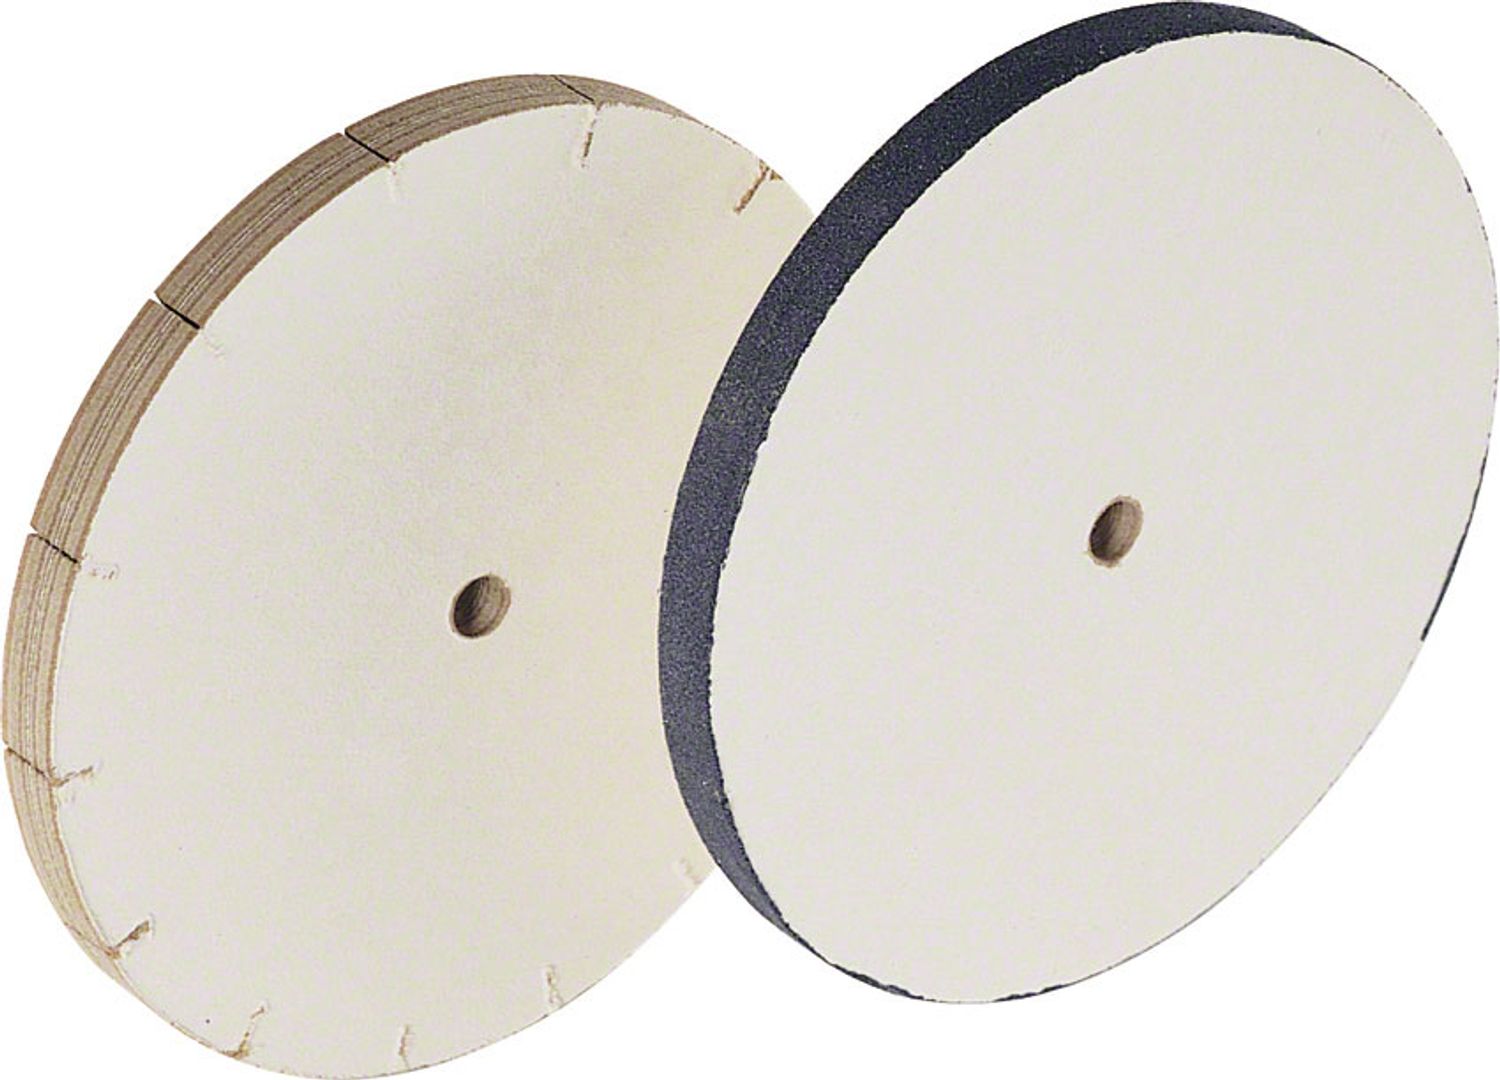 Wheel Sharp 8 in Slotted Paper Polishing Wheel for 6 in Polish and Hone on your Bench Grinder Grinders Made in USA Deburr